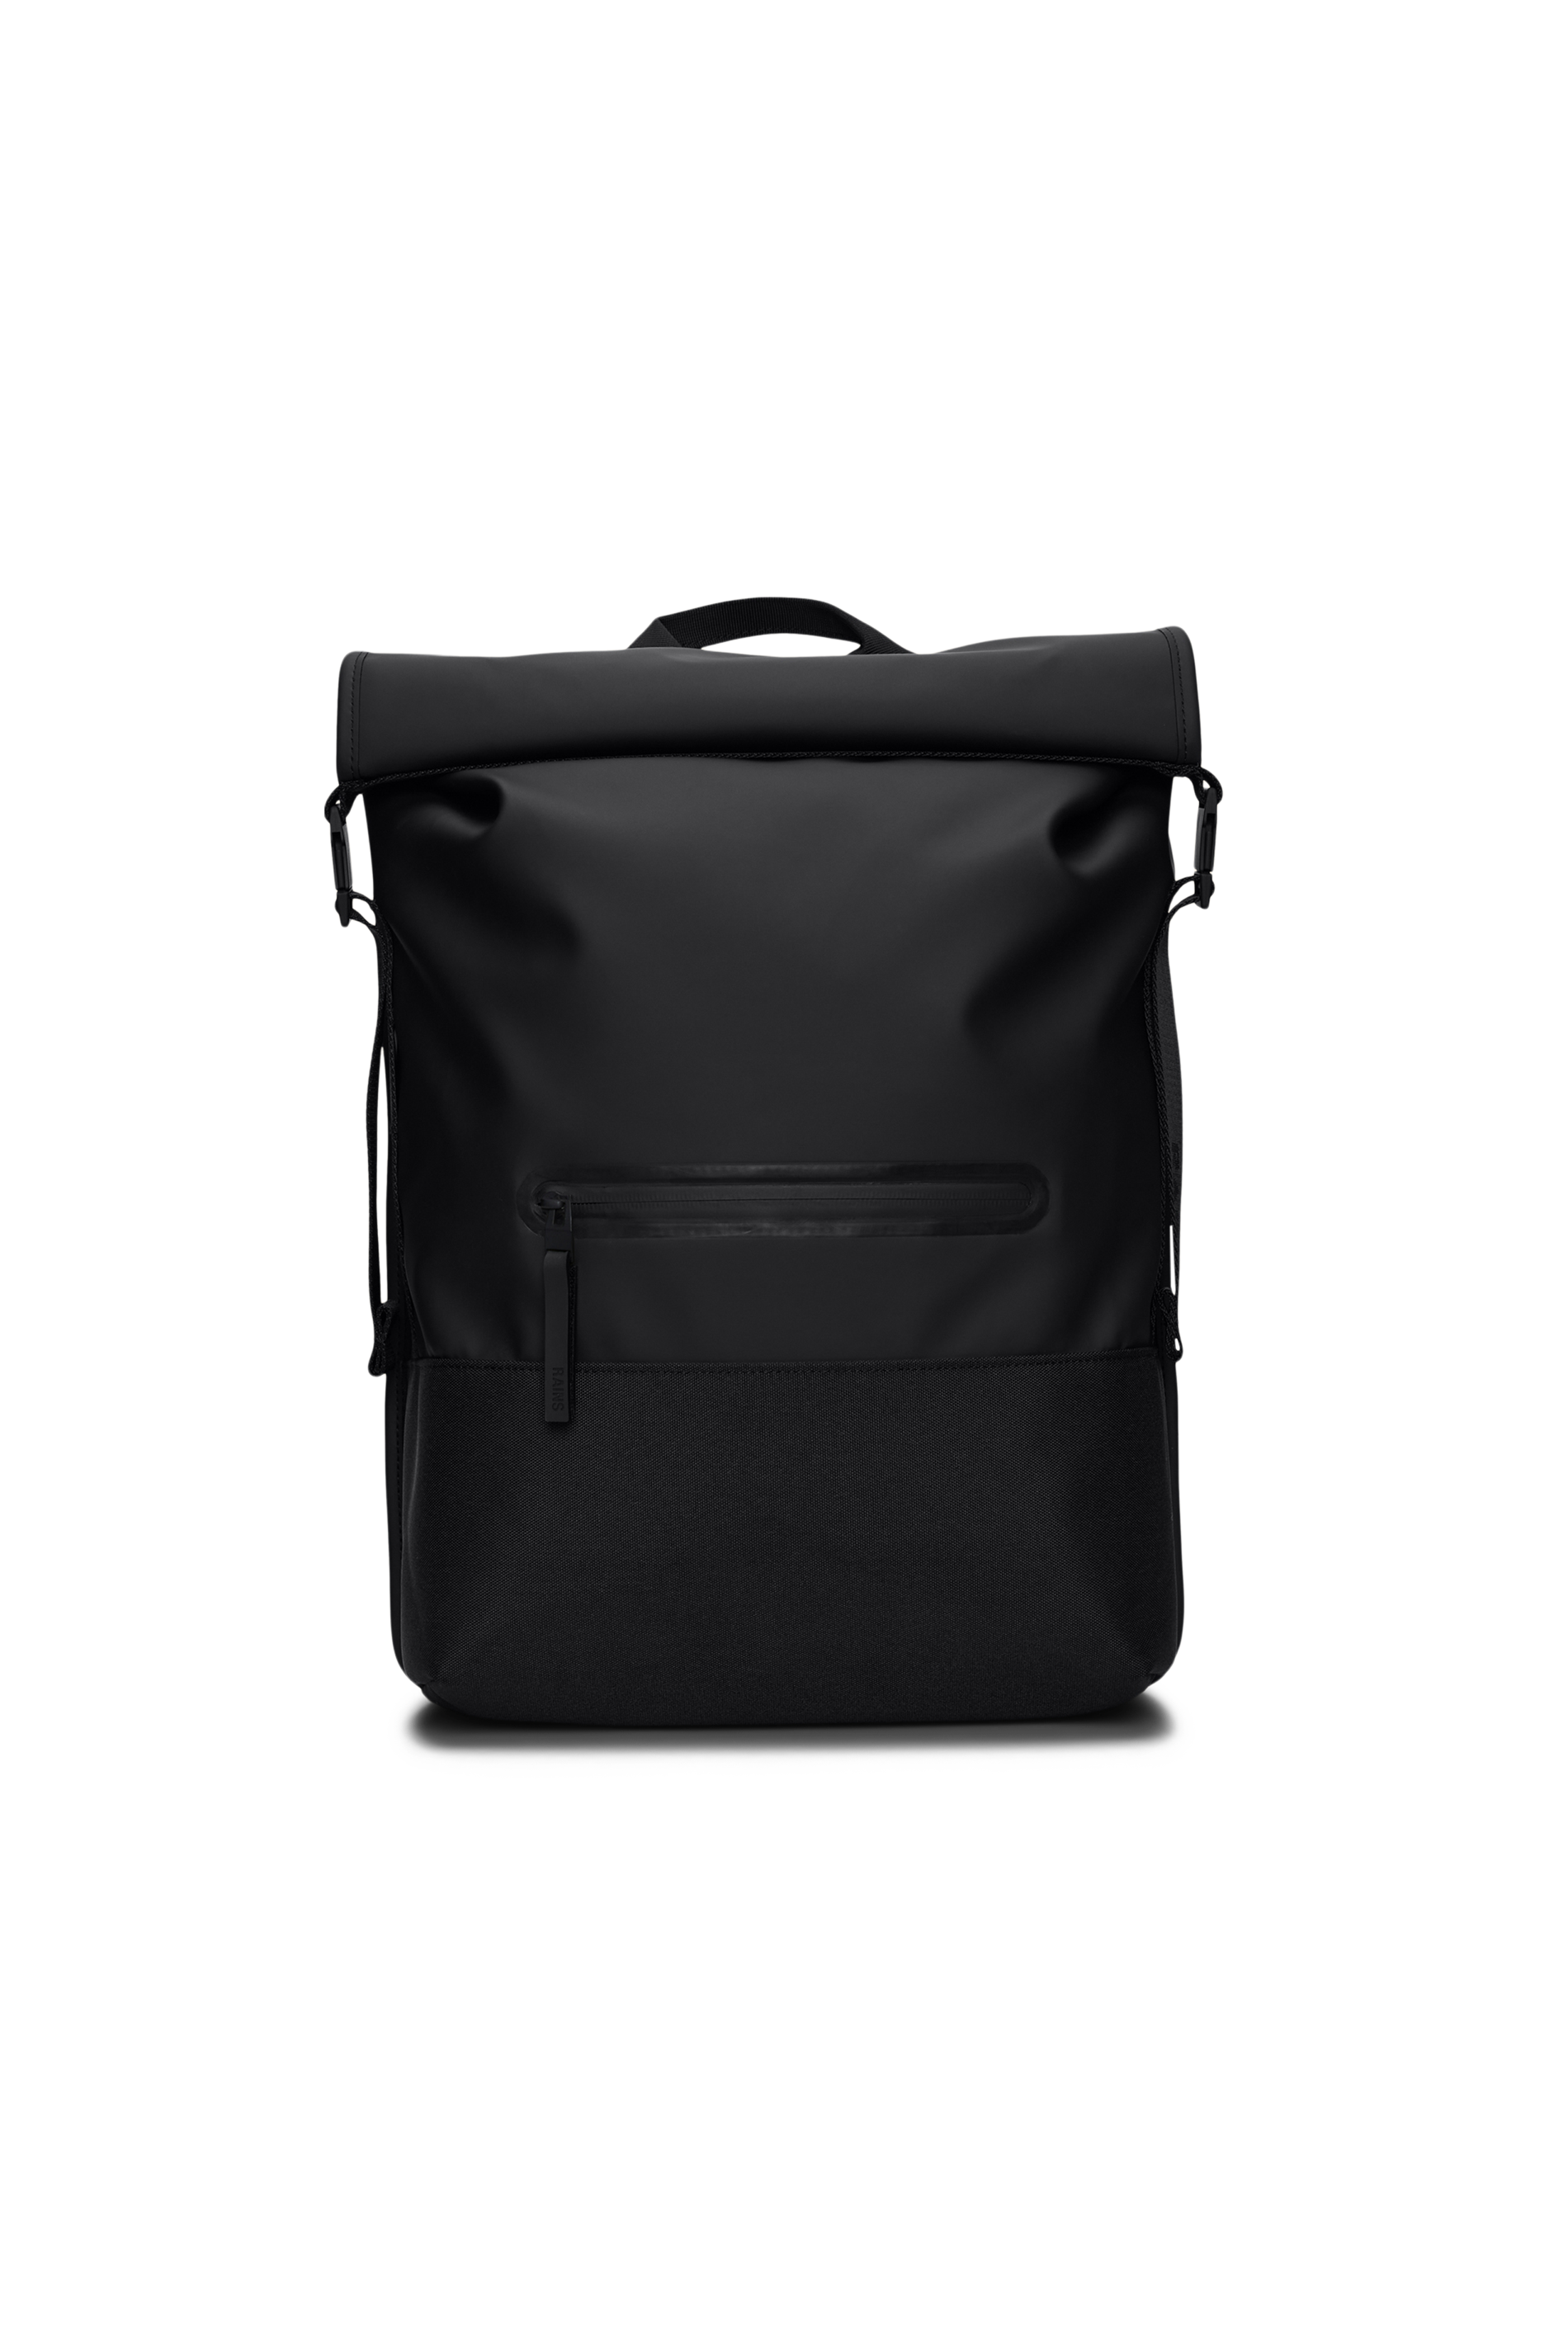 Rains® Trail Rolltop Backpack in Black for $220 | Free Shipping